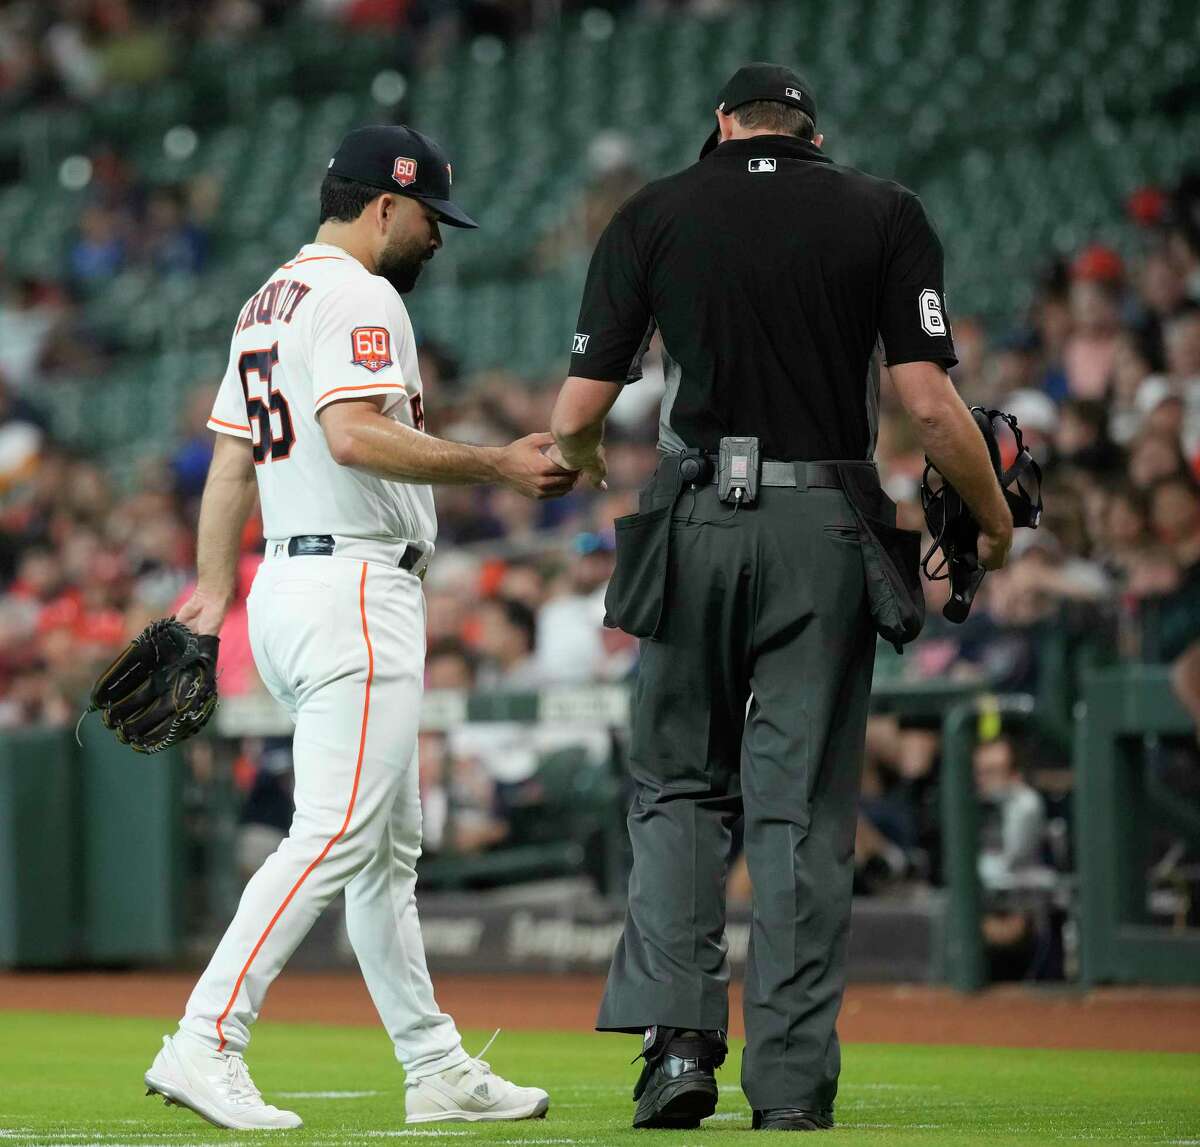 Houston Astros starting pitcher Jose Urquidy (65) gets his hand checked by home plate umpire Ryan Additon after the top of the first inning of a MLB game at Minute Maid Park on Wednesday, June 8, 2022 in Houston.